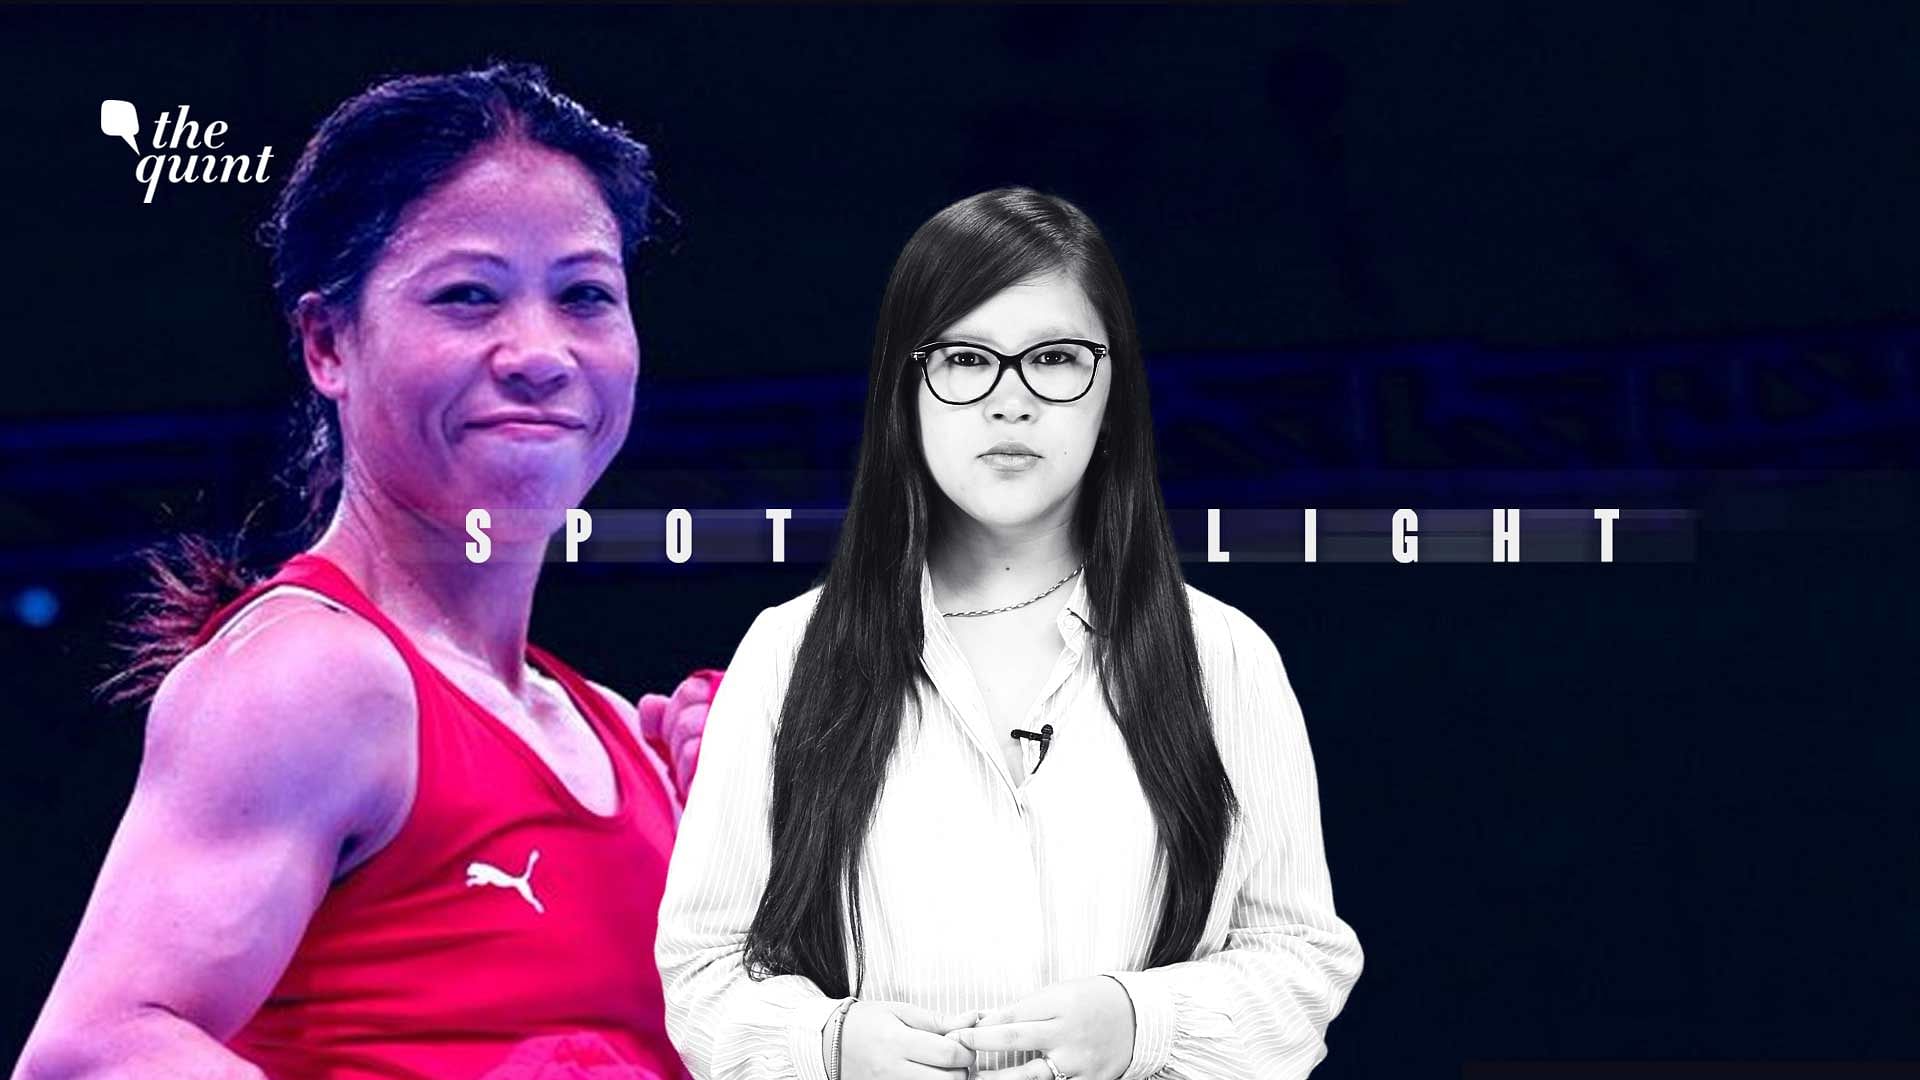 A look at MC Mary Kom’s illustrious career over the last two decades where she has emerged as not just India but also the World’s most successful boxer.